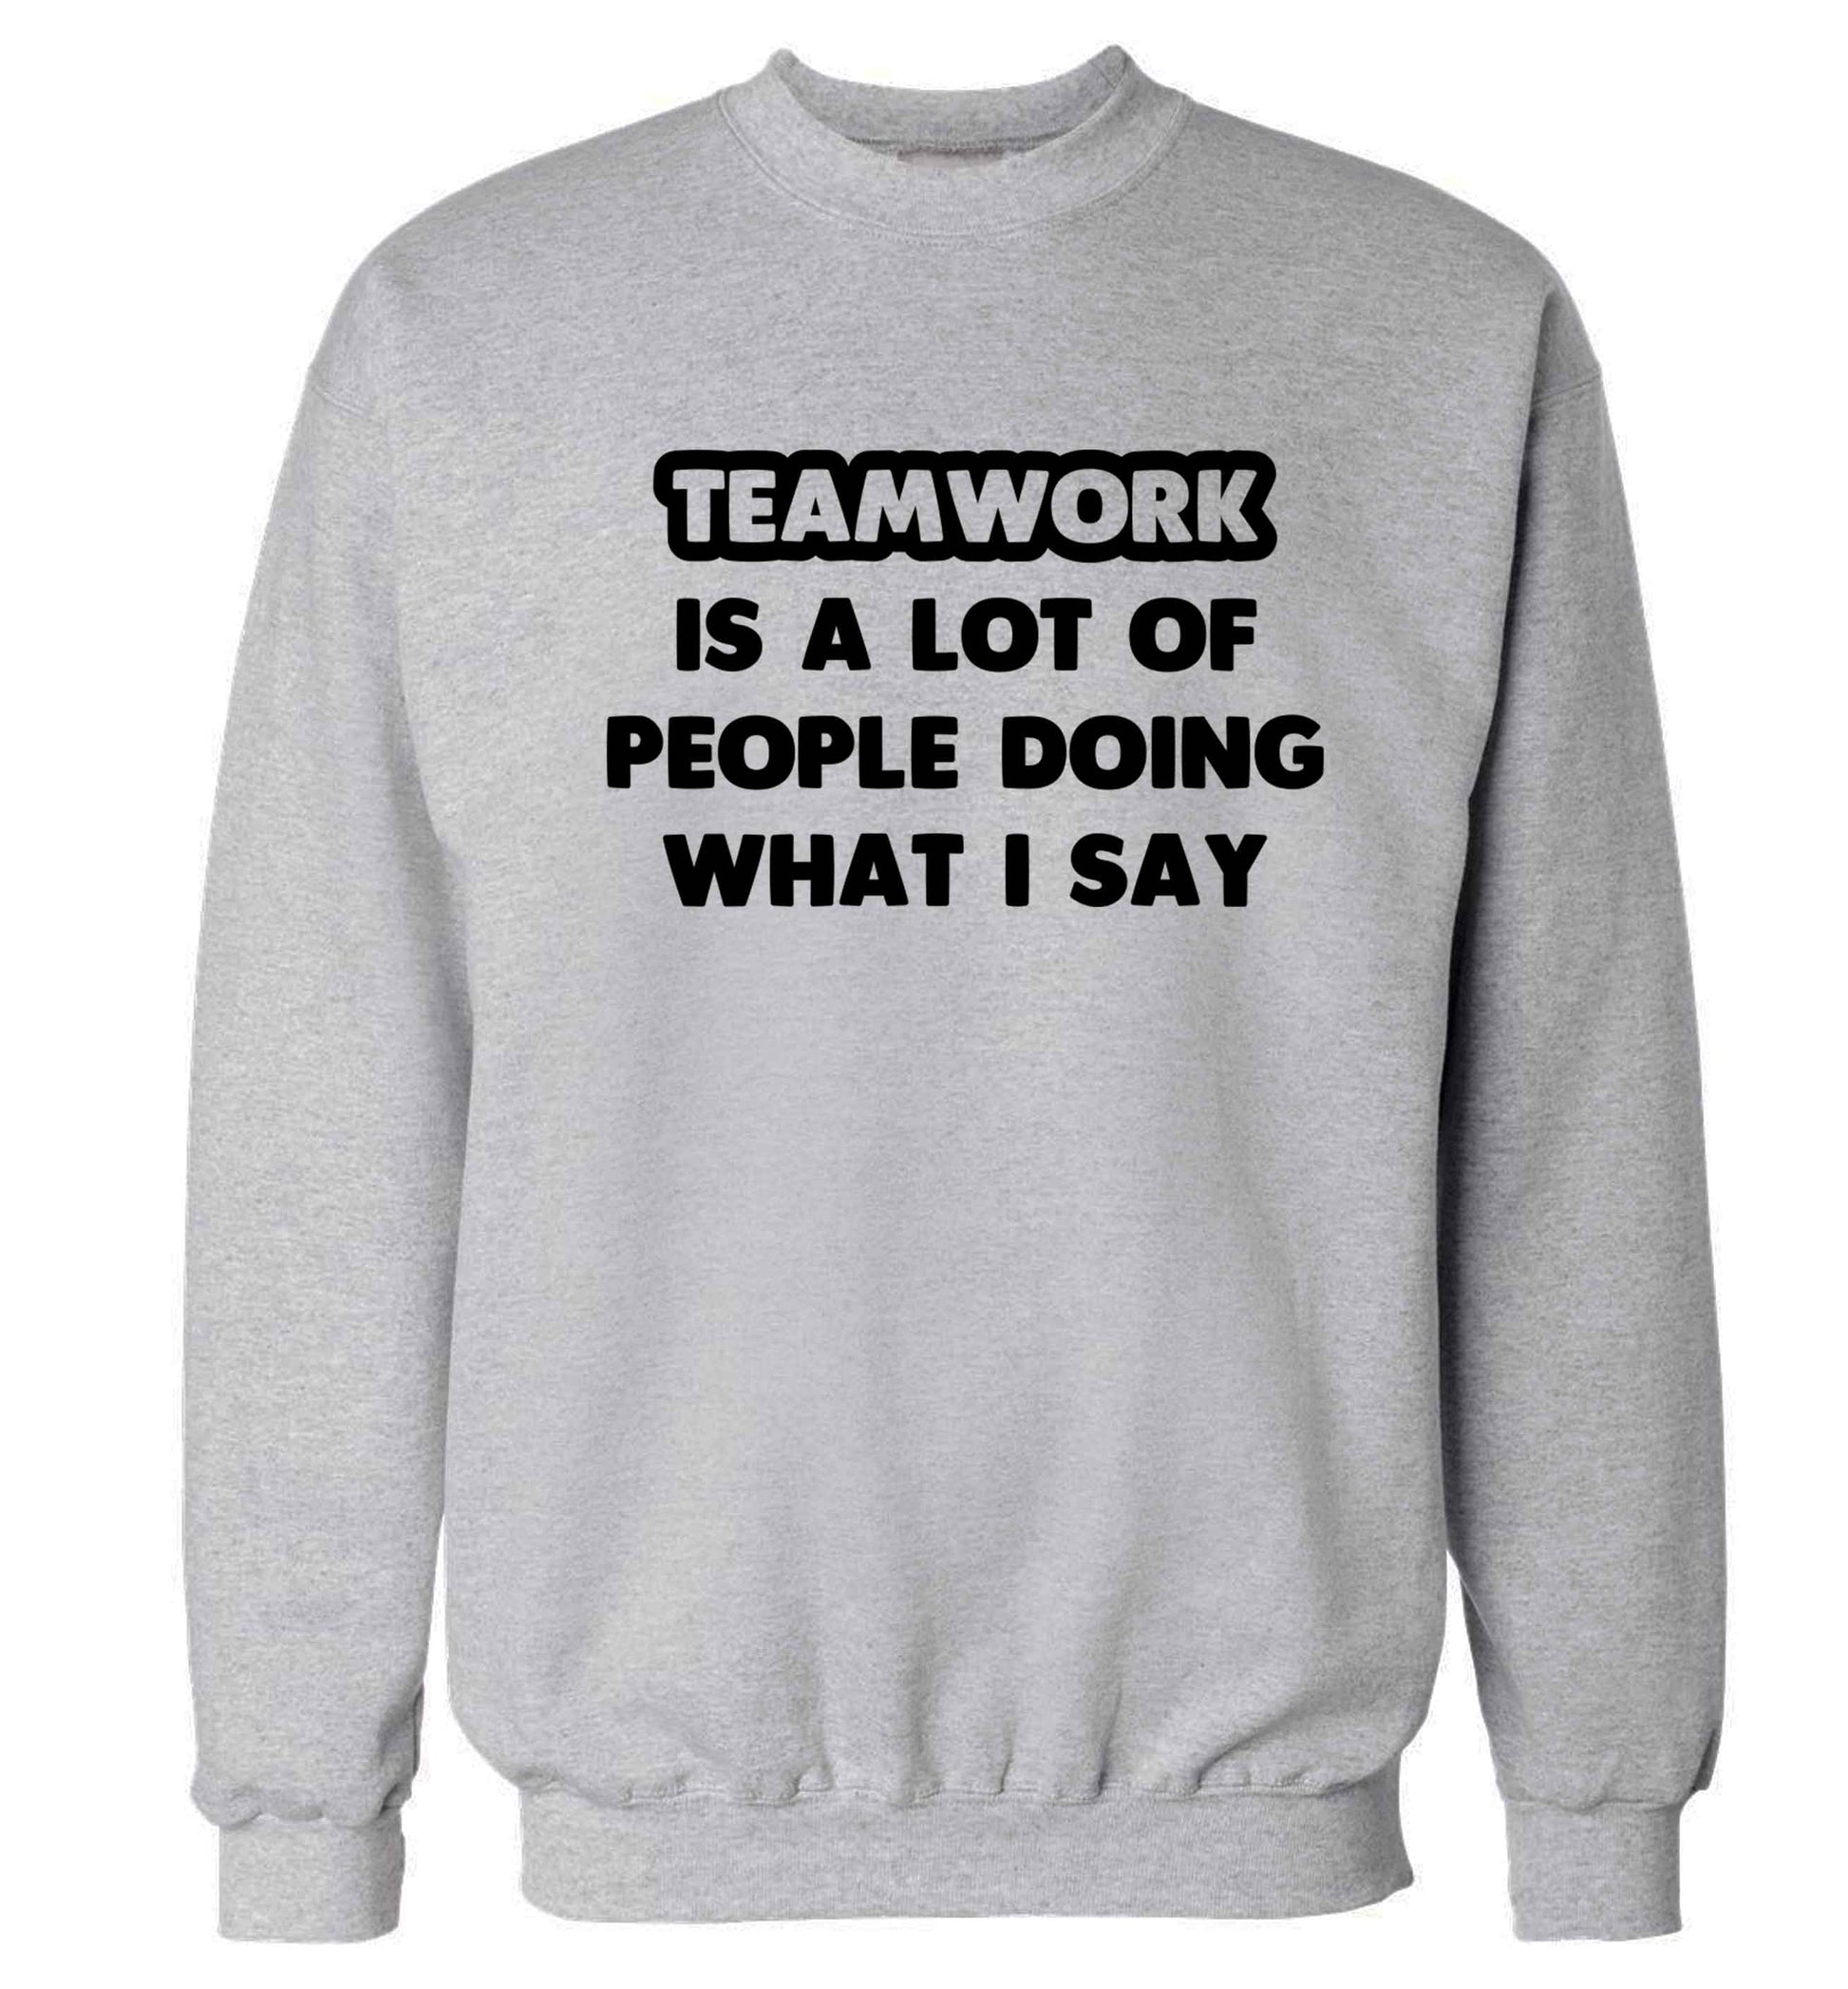 Teamwork is a lot of people doing what I say Adult's unisex grey Sweater 2XL